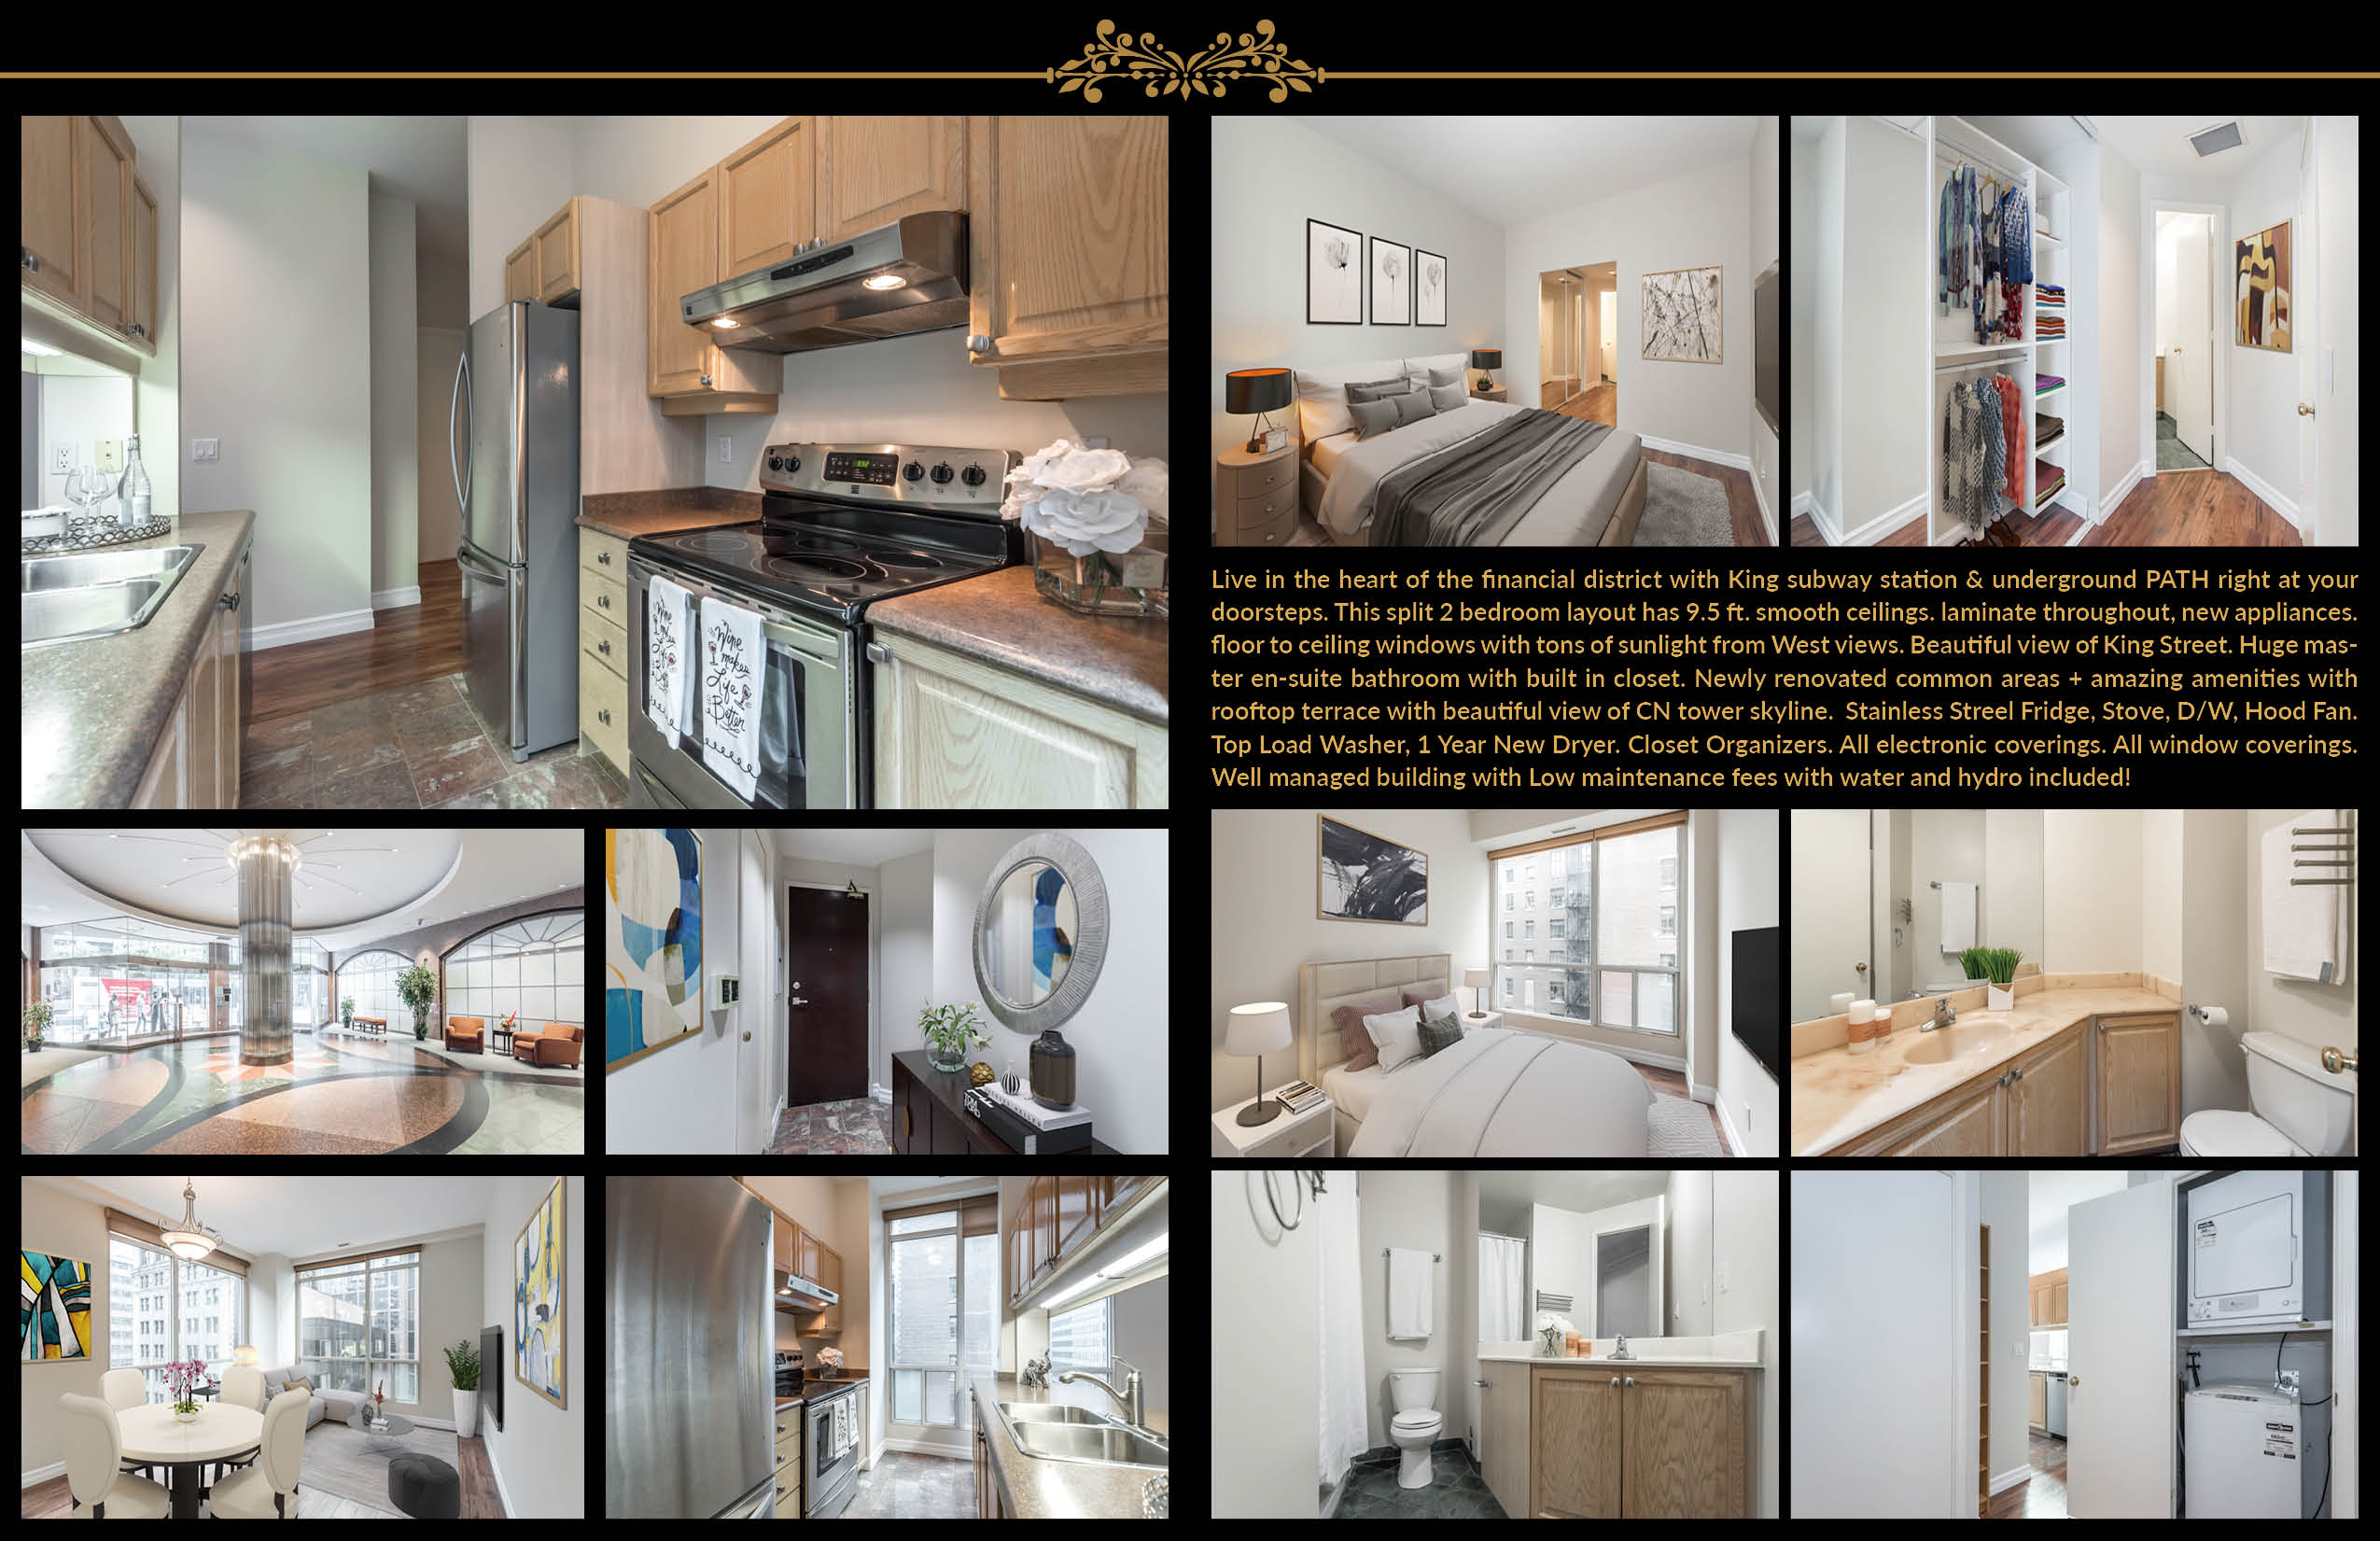 This is a mix of pictures showing the kitchen and bedroom and bathroom and so much more.